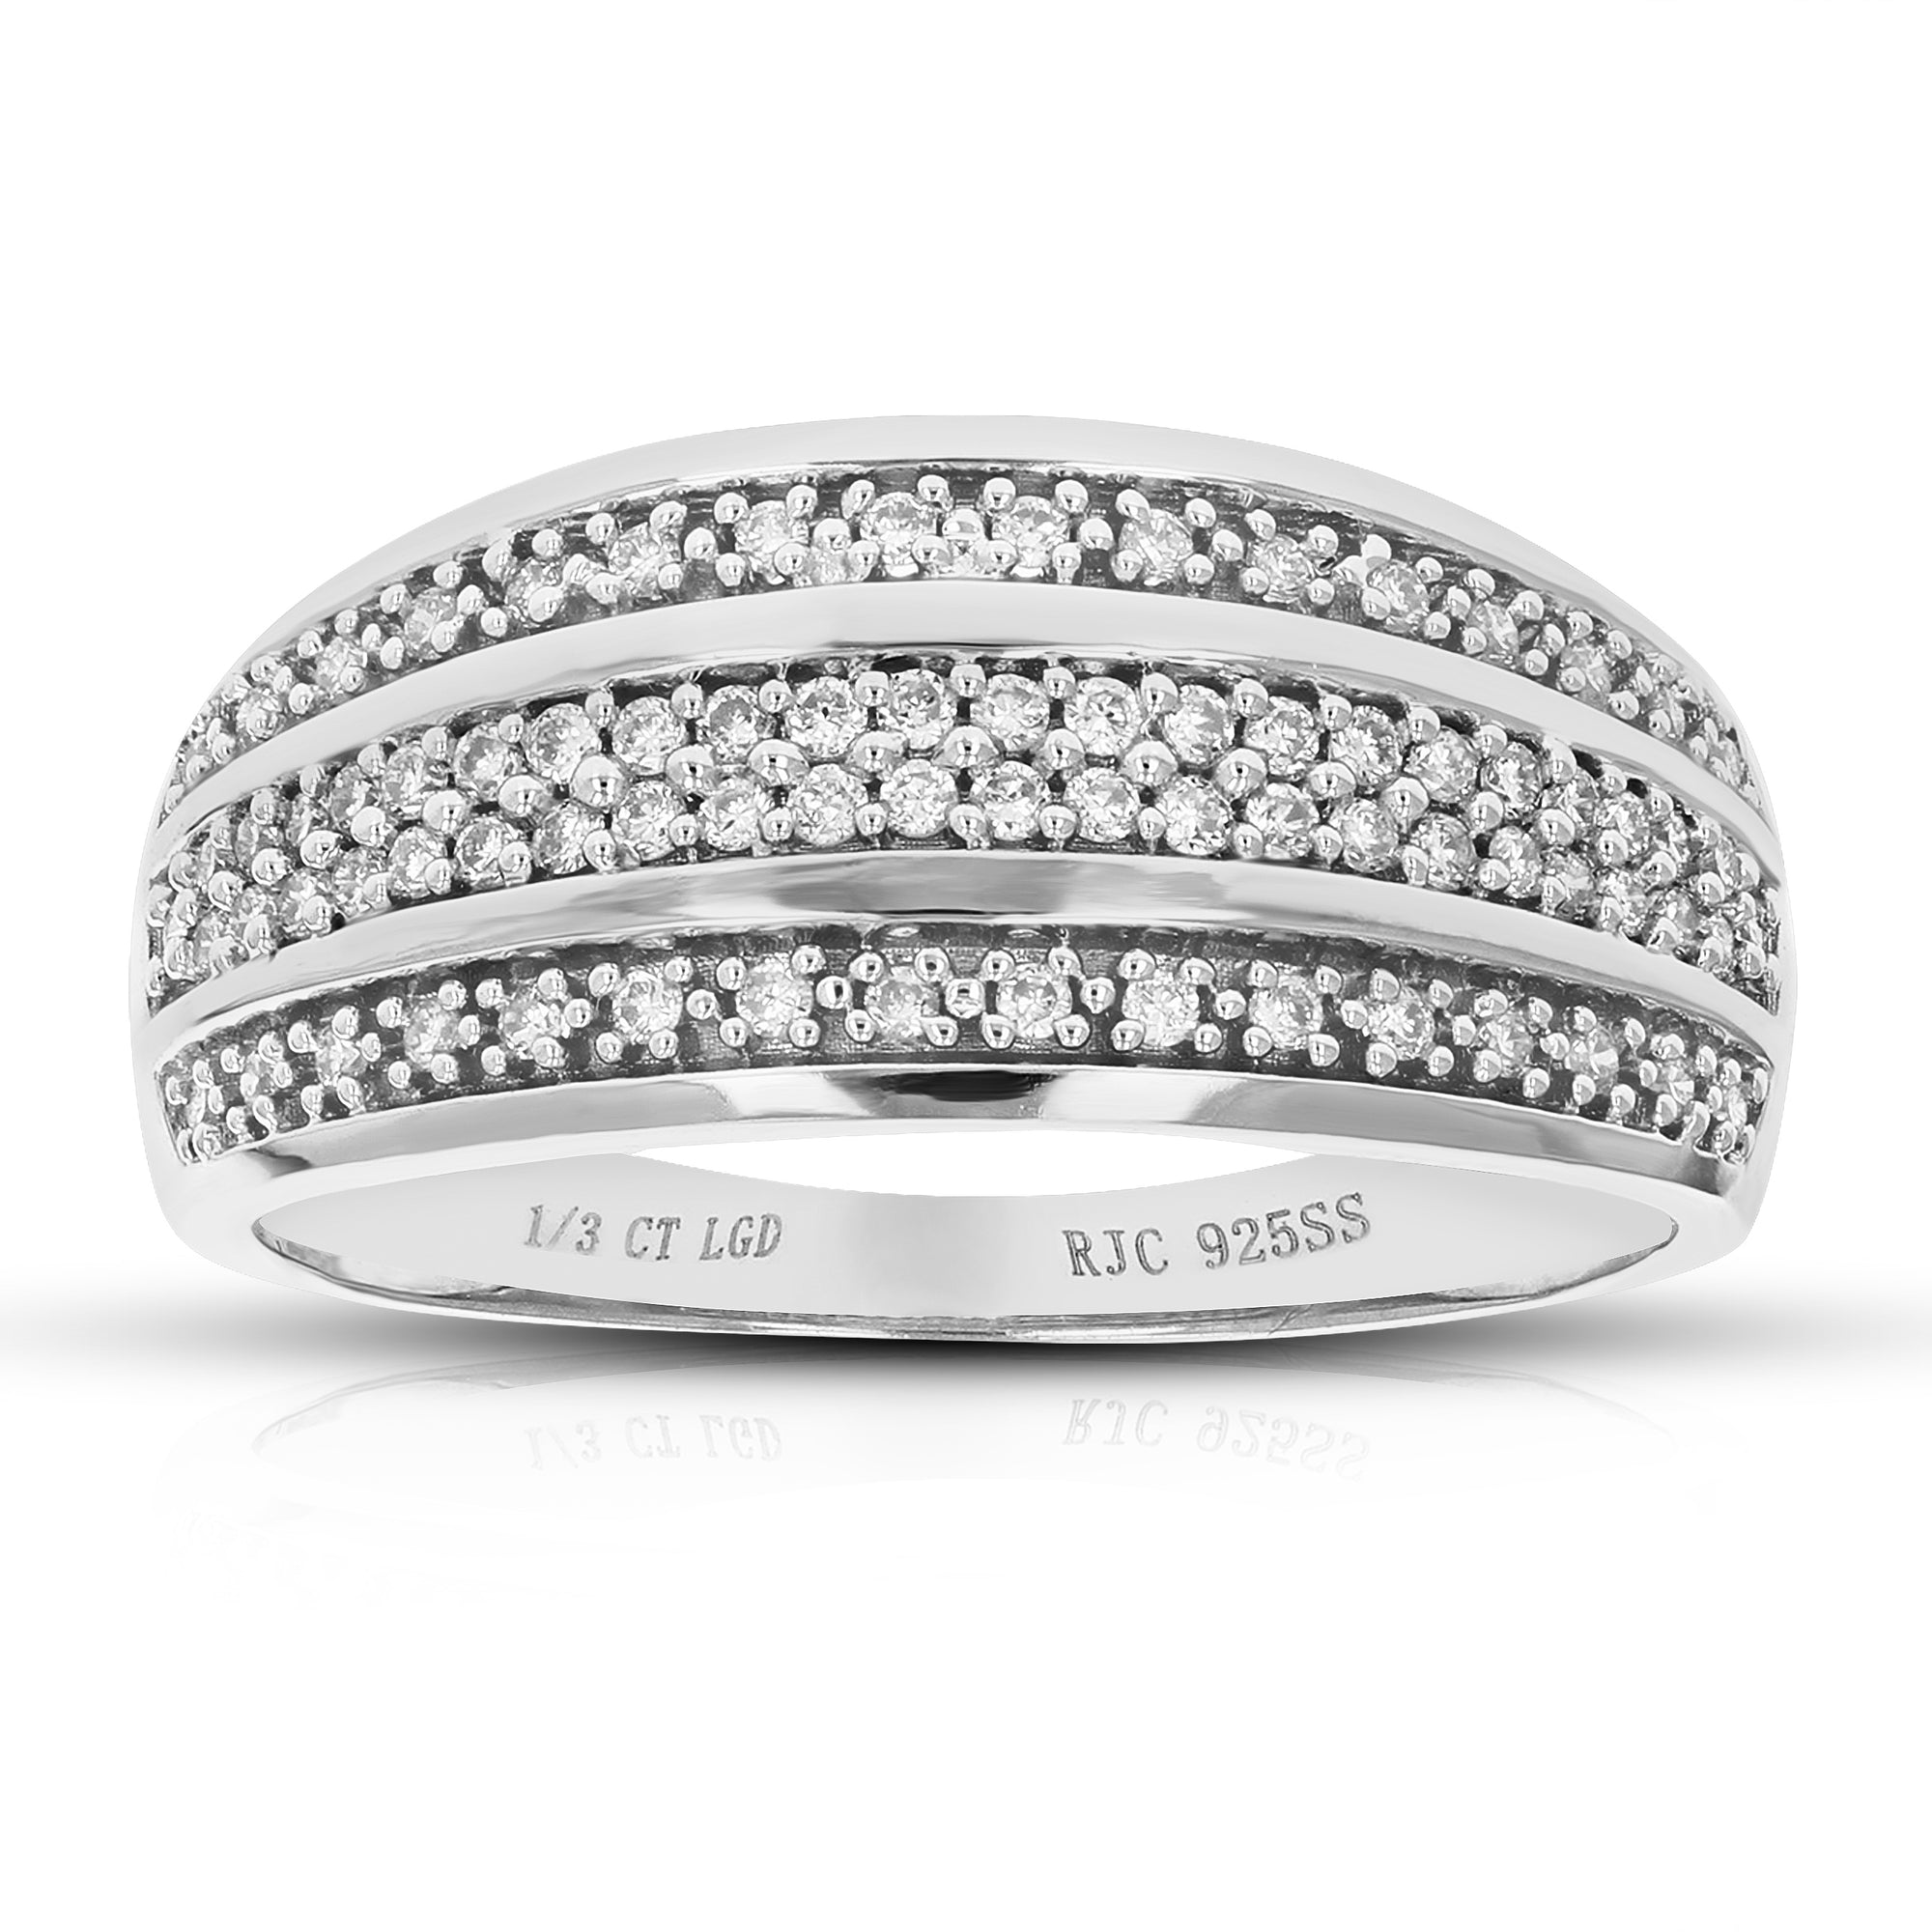 1/3 cttw Round Cut Lab Grown Diamond Wedding Band 78 Stones .925 Sterling Silver Prong Set